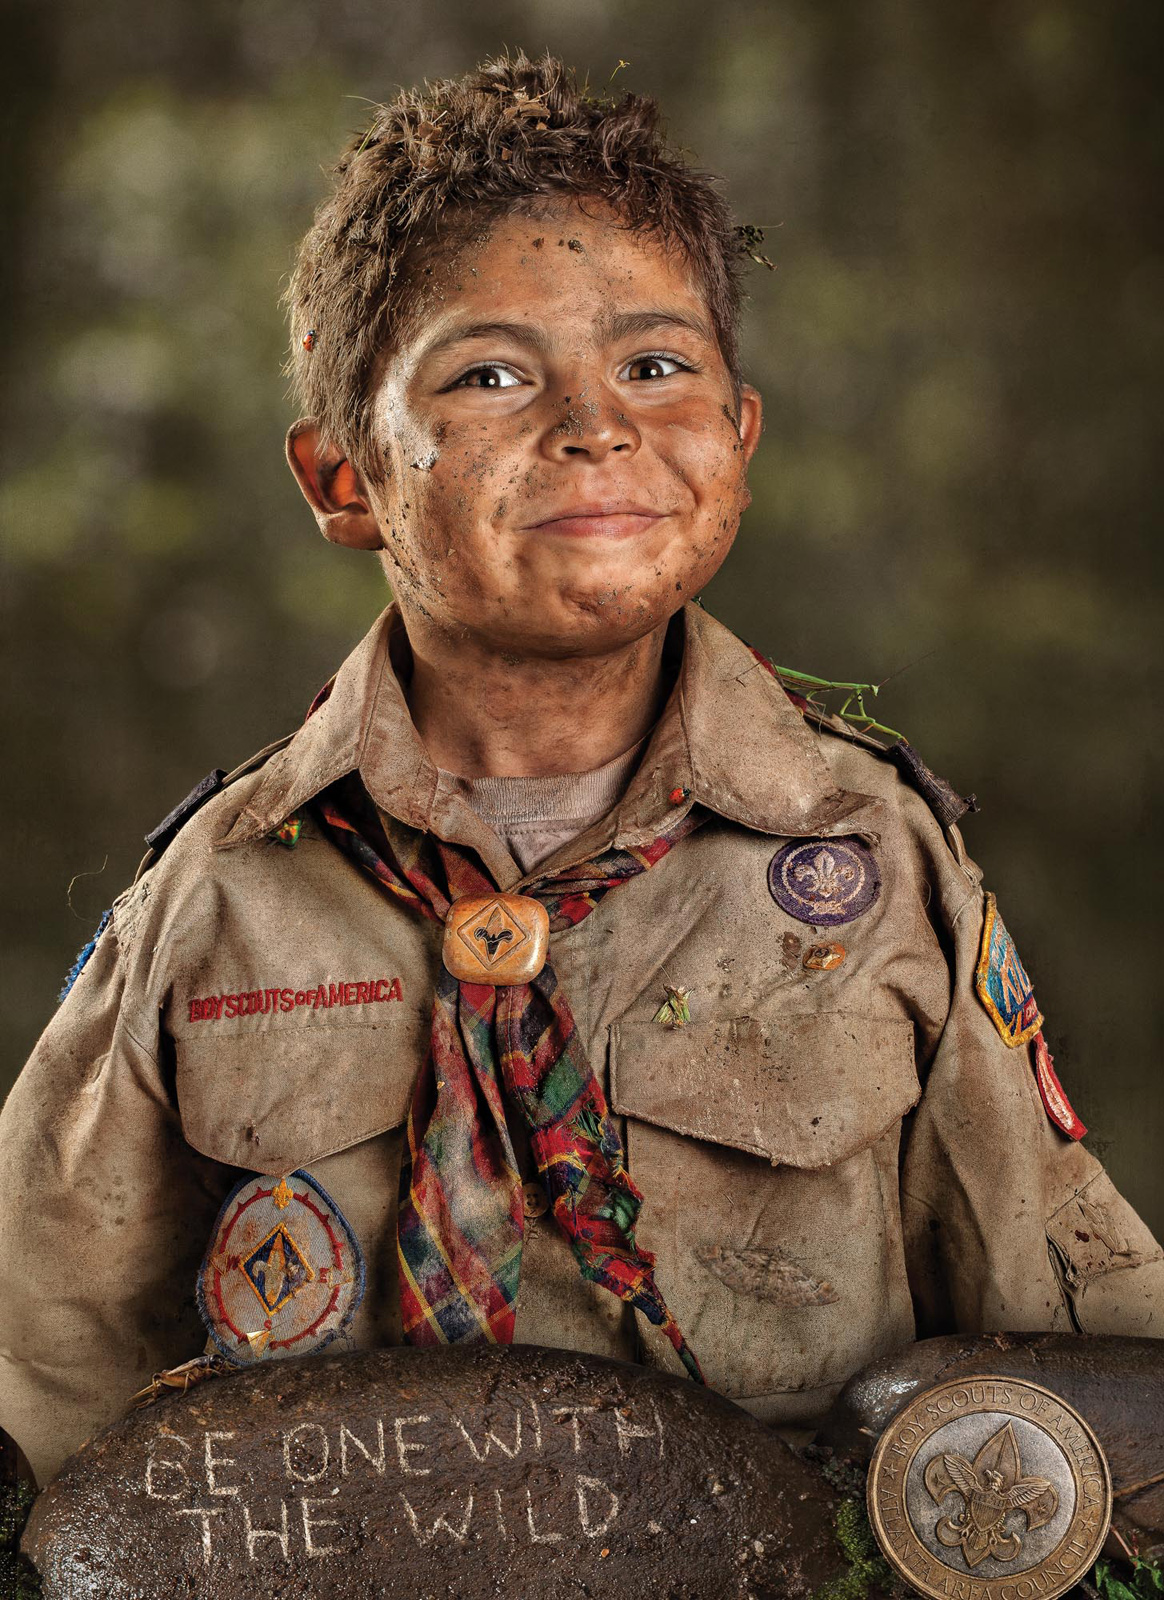 Camping Boy Scouts of America - Bing images